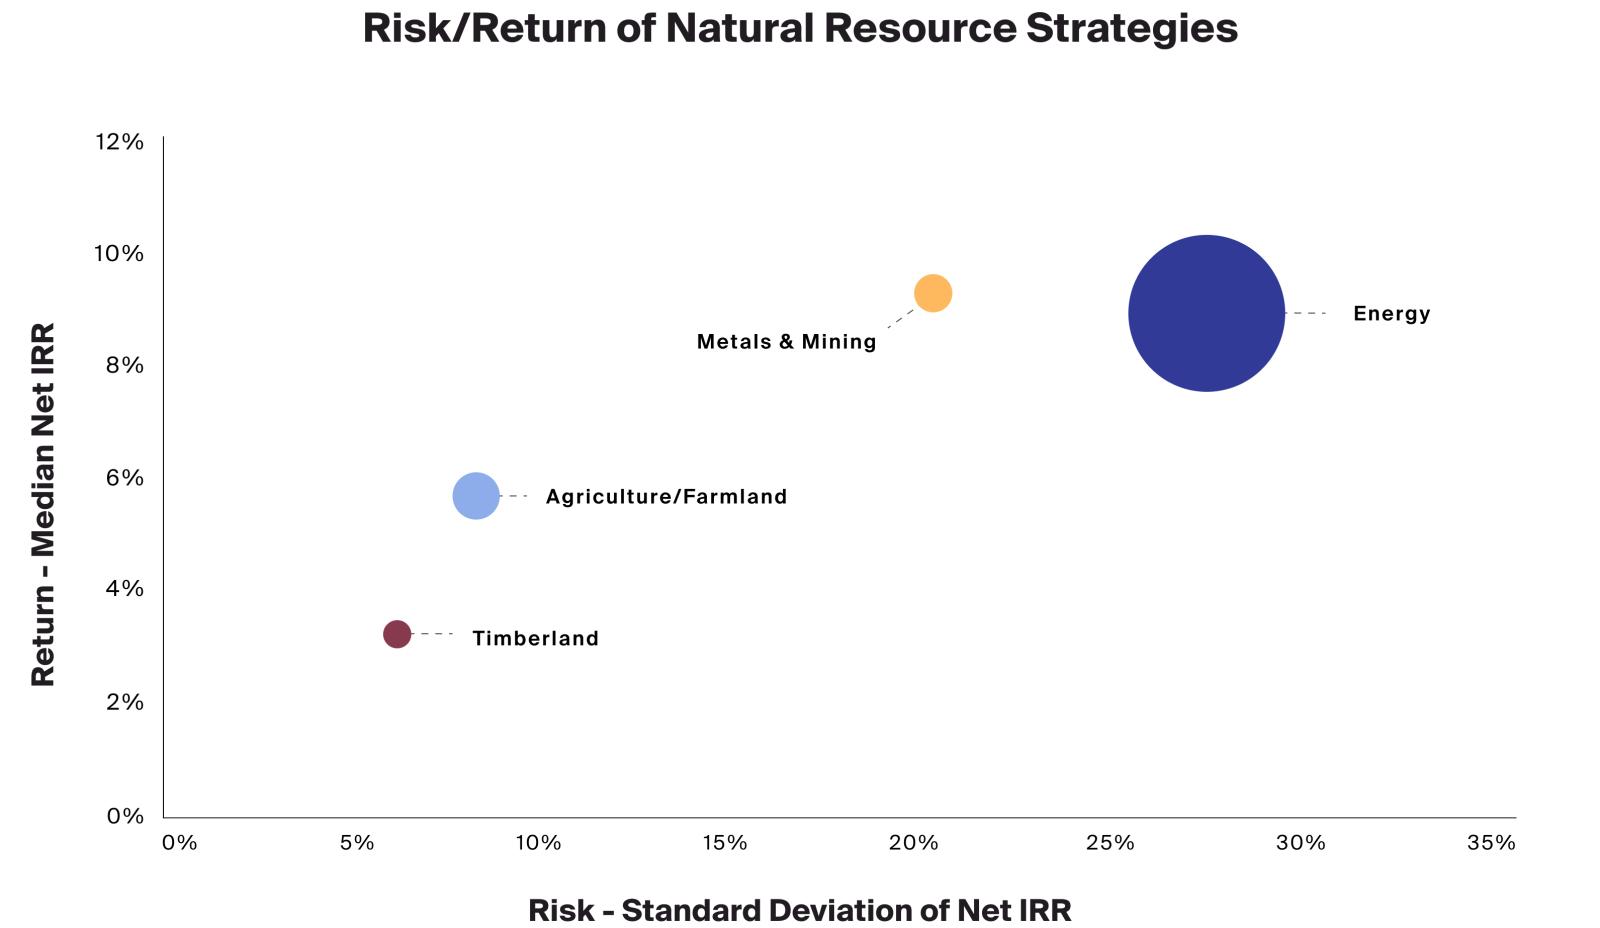 Exhibit 4: Natural resource strategies display a variety of risk and return profiles